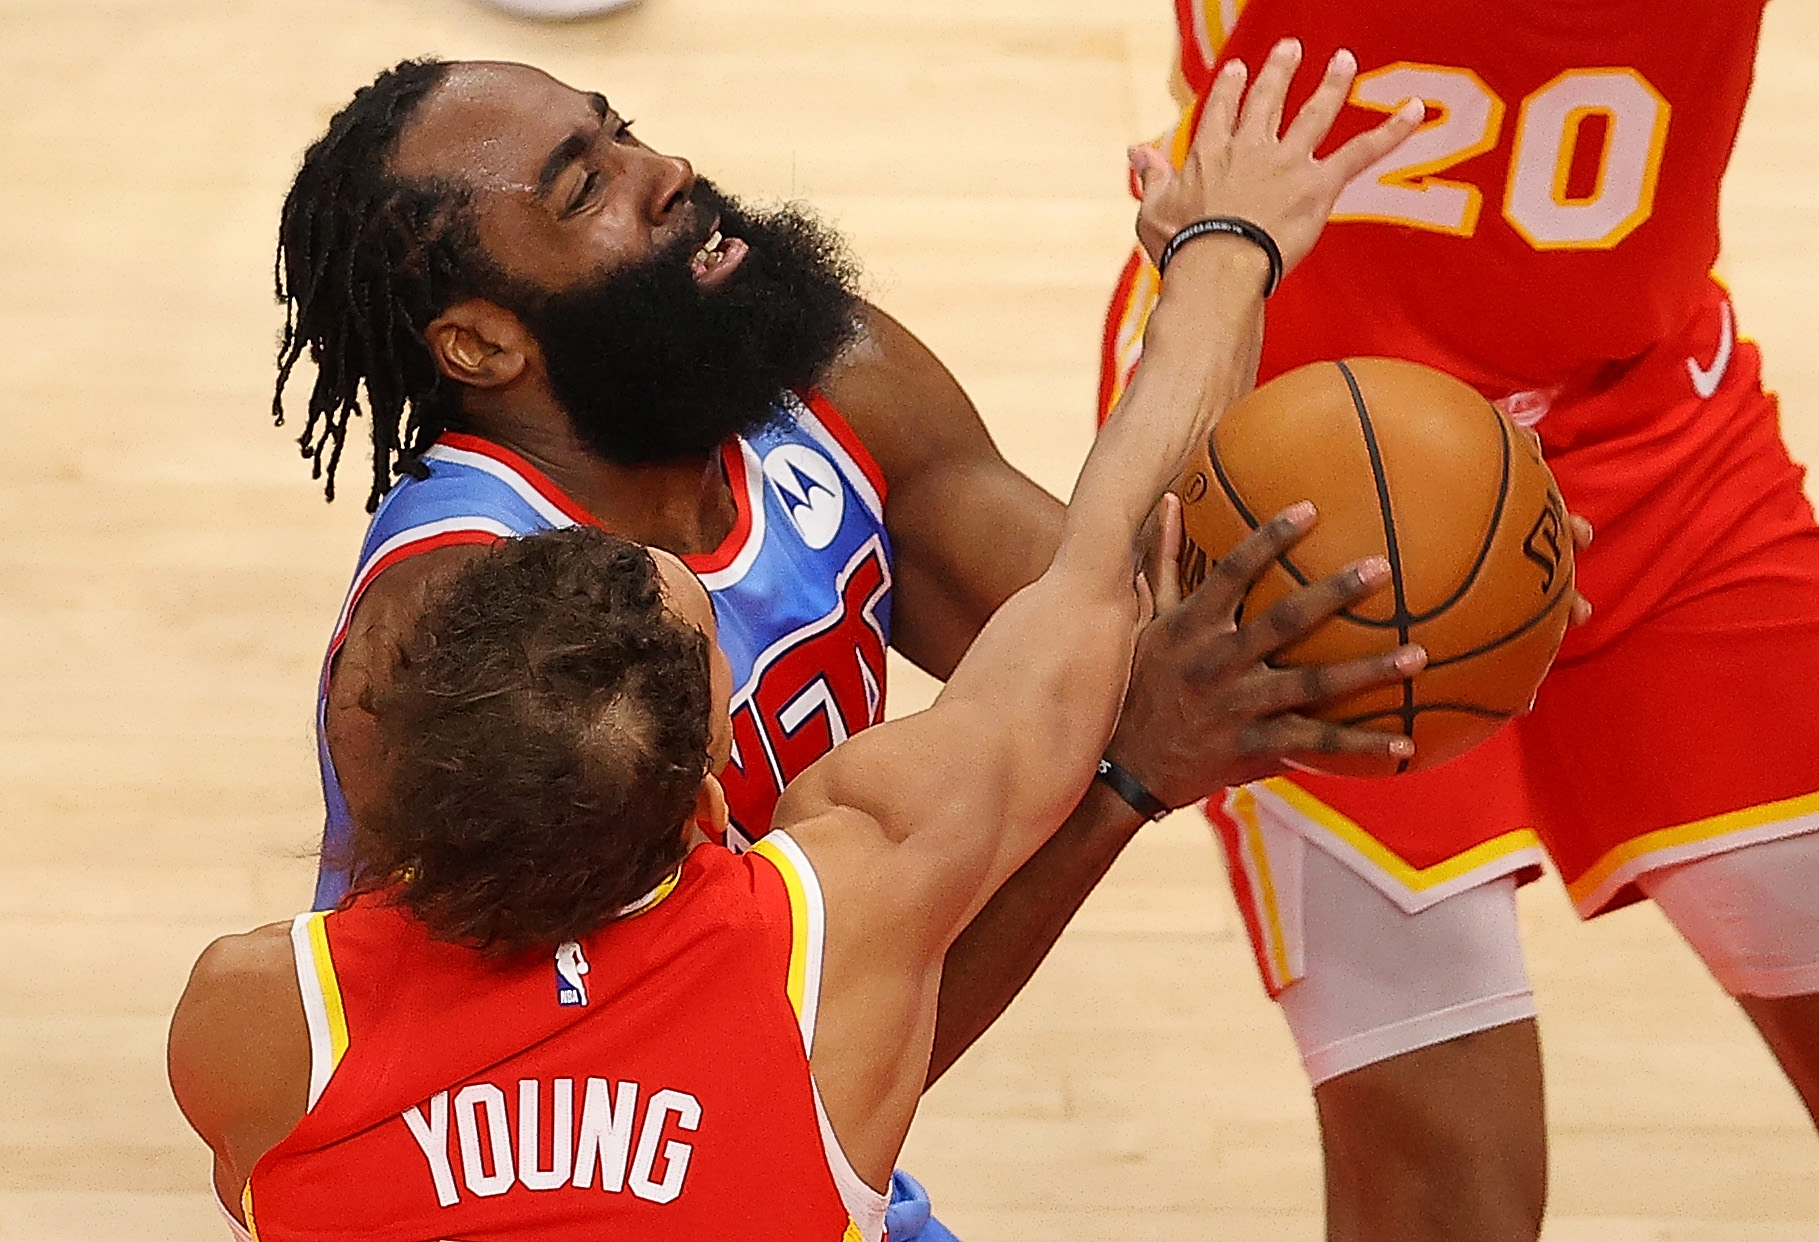 James Harden of the Brooklyn Nets is fouled by Trae Young of the Atlanta Hawks.